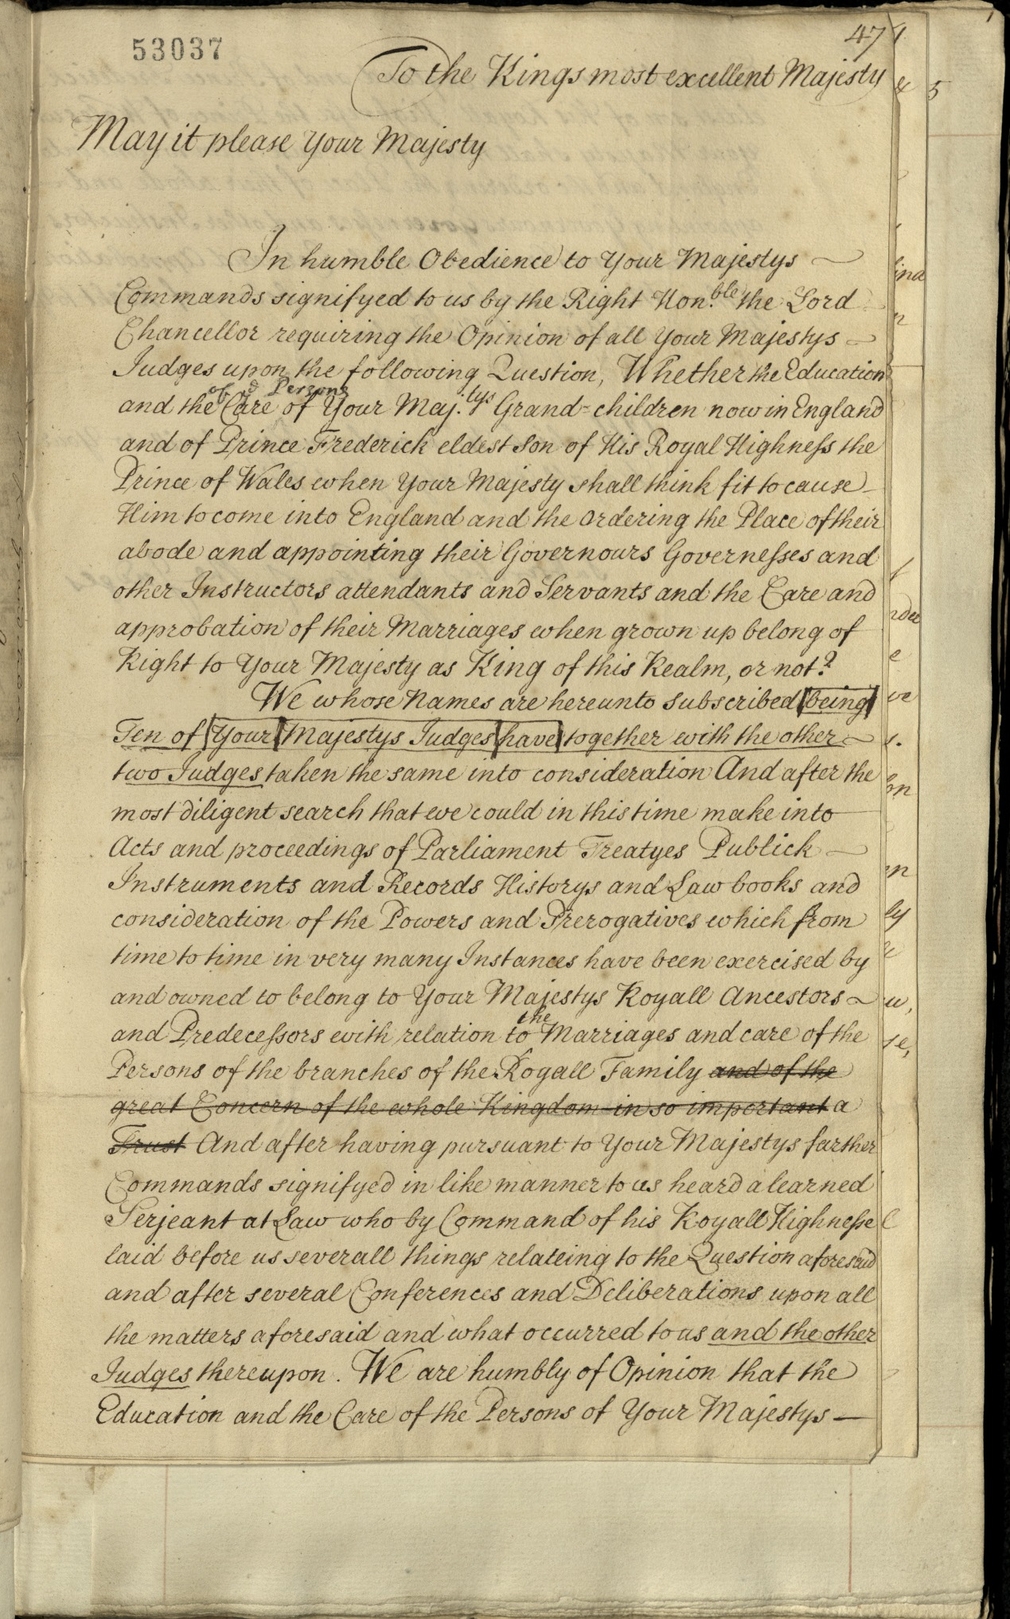 Document from a volume of papers collated by Lord Macclesfield